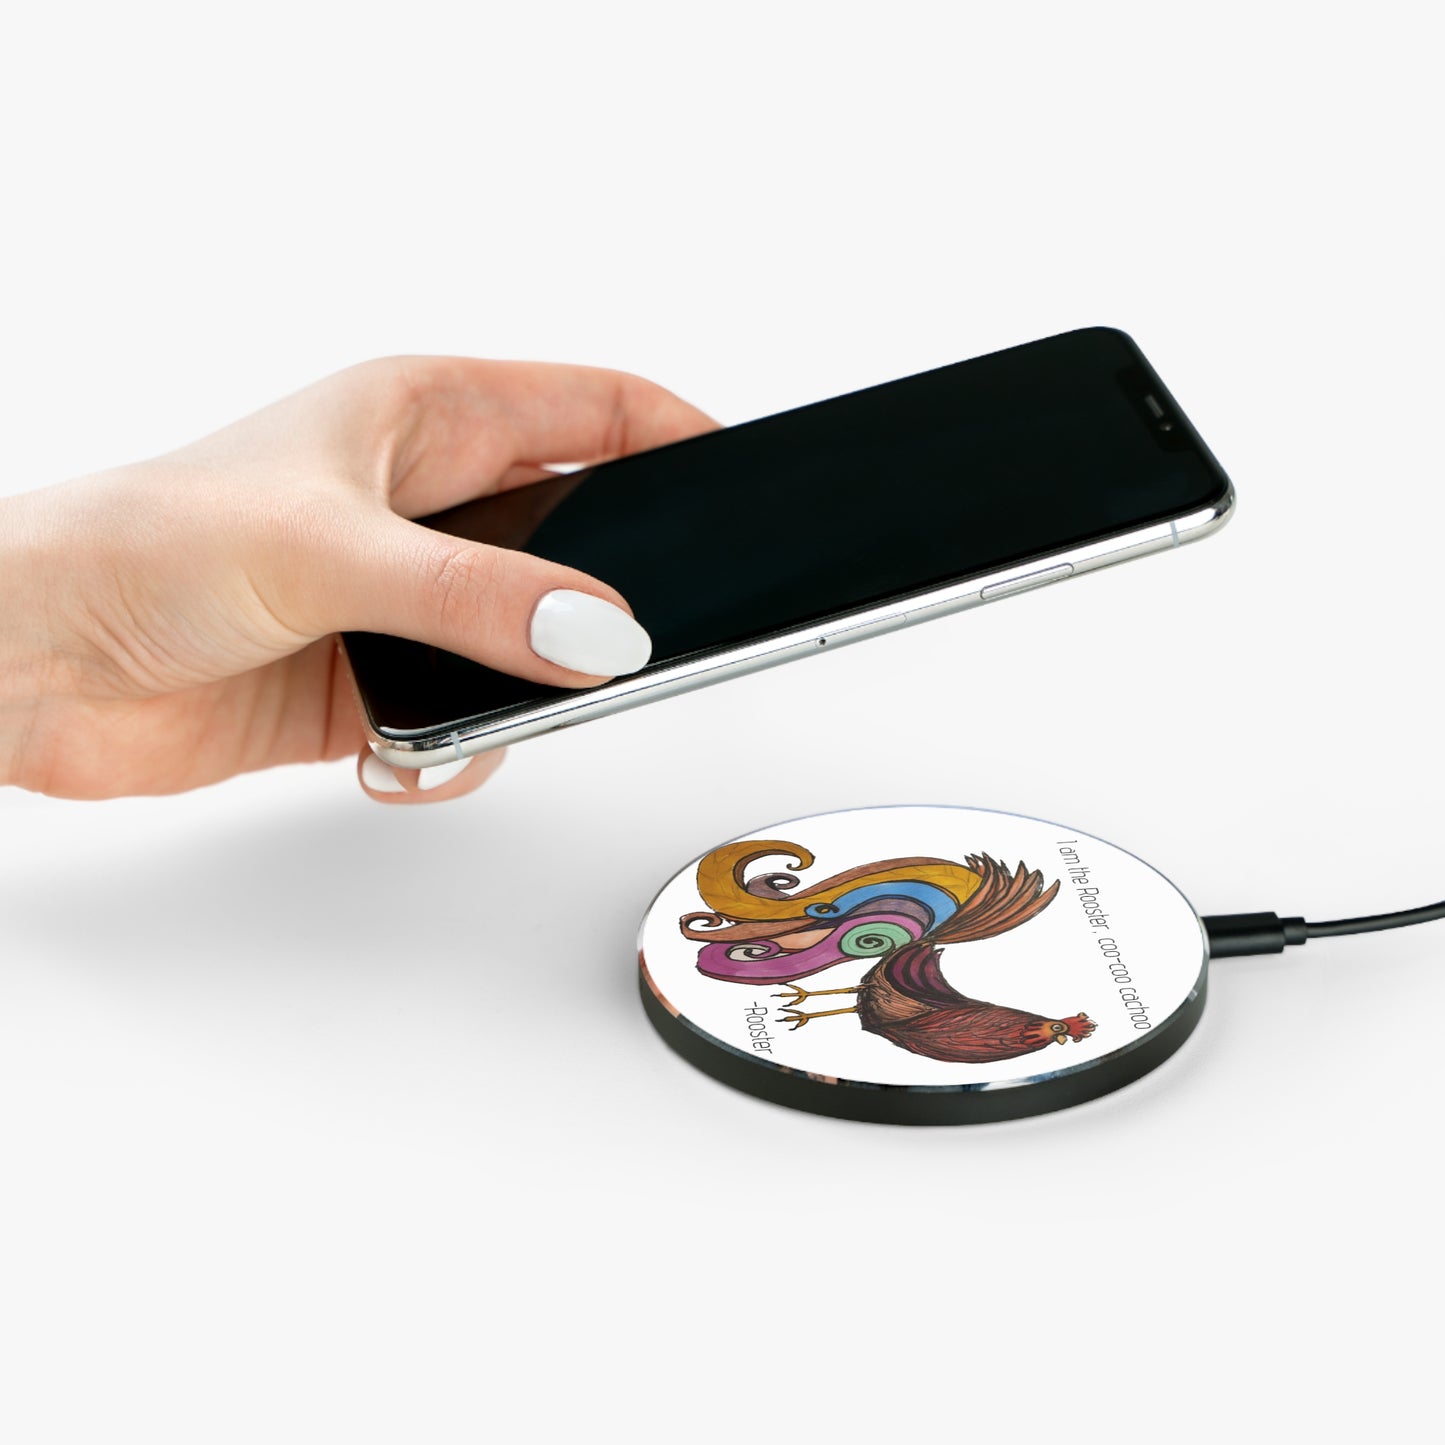 Signed Rooster™ Wireless Charger coo coo cachoo